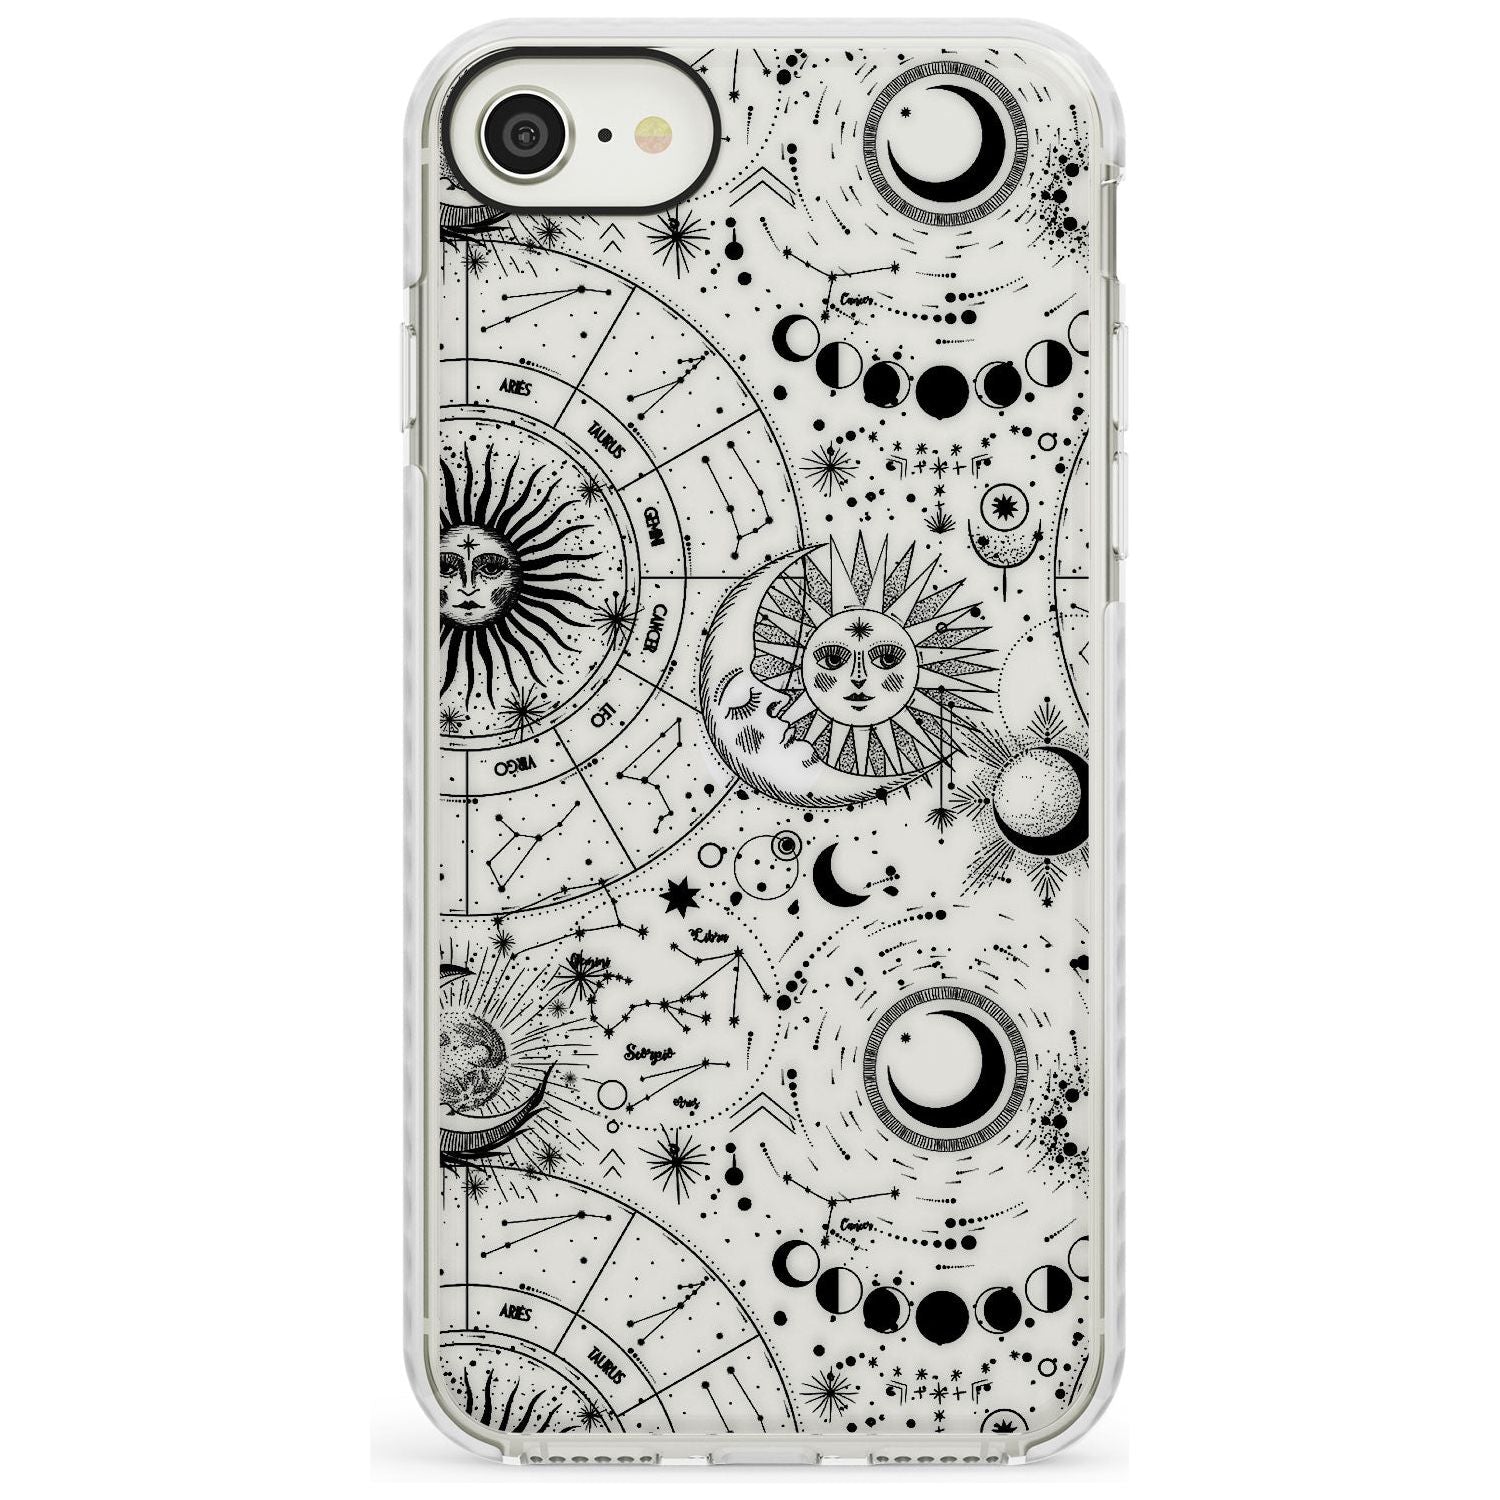 Suns, Moons, Zodiac Signs Astrological Impact Phone Case for iPhone SE 8 7 Plus